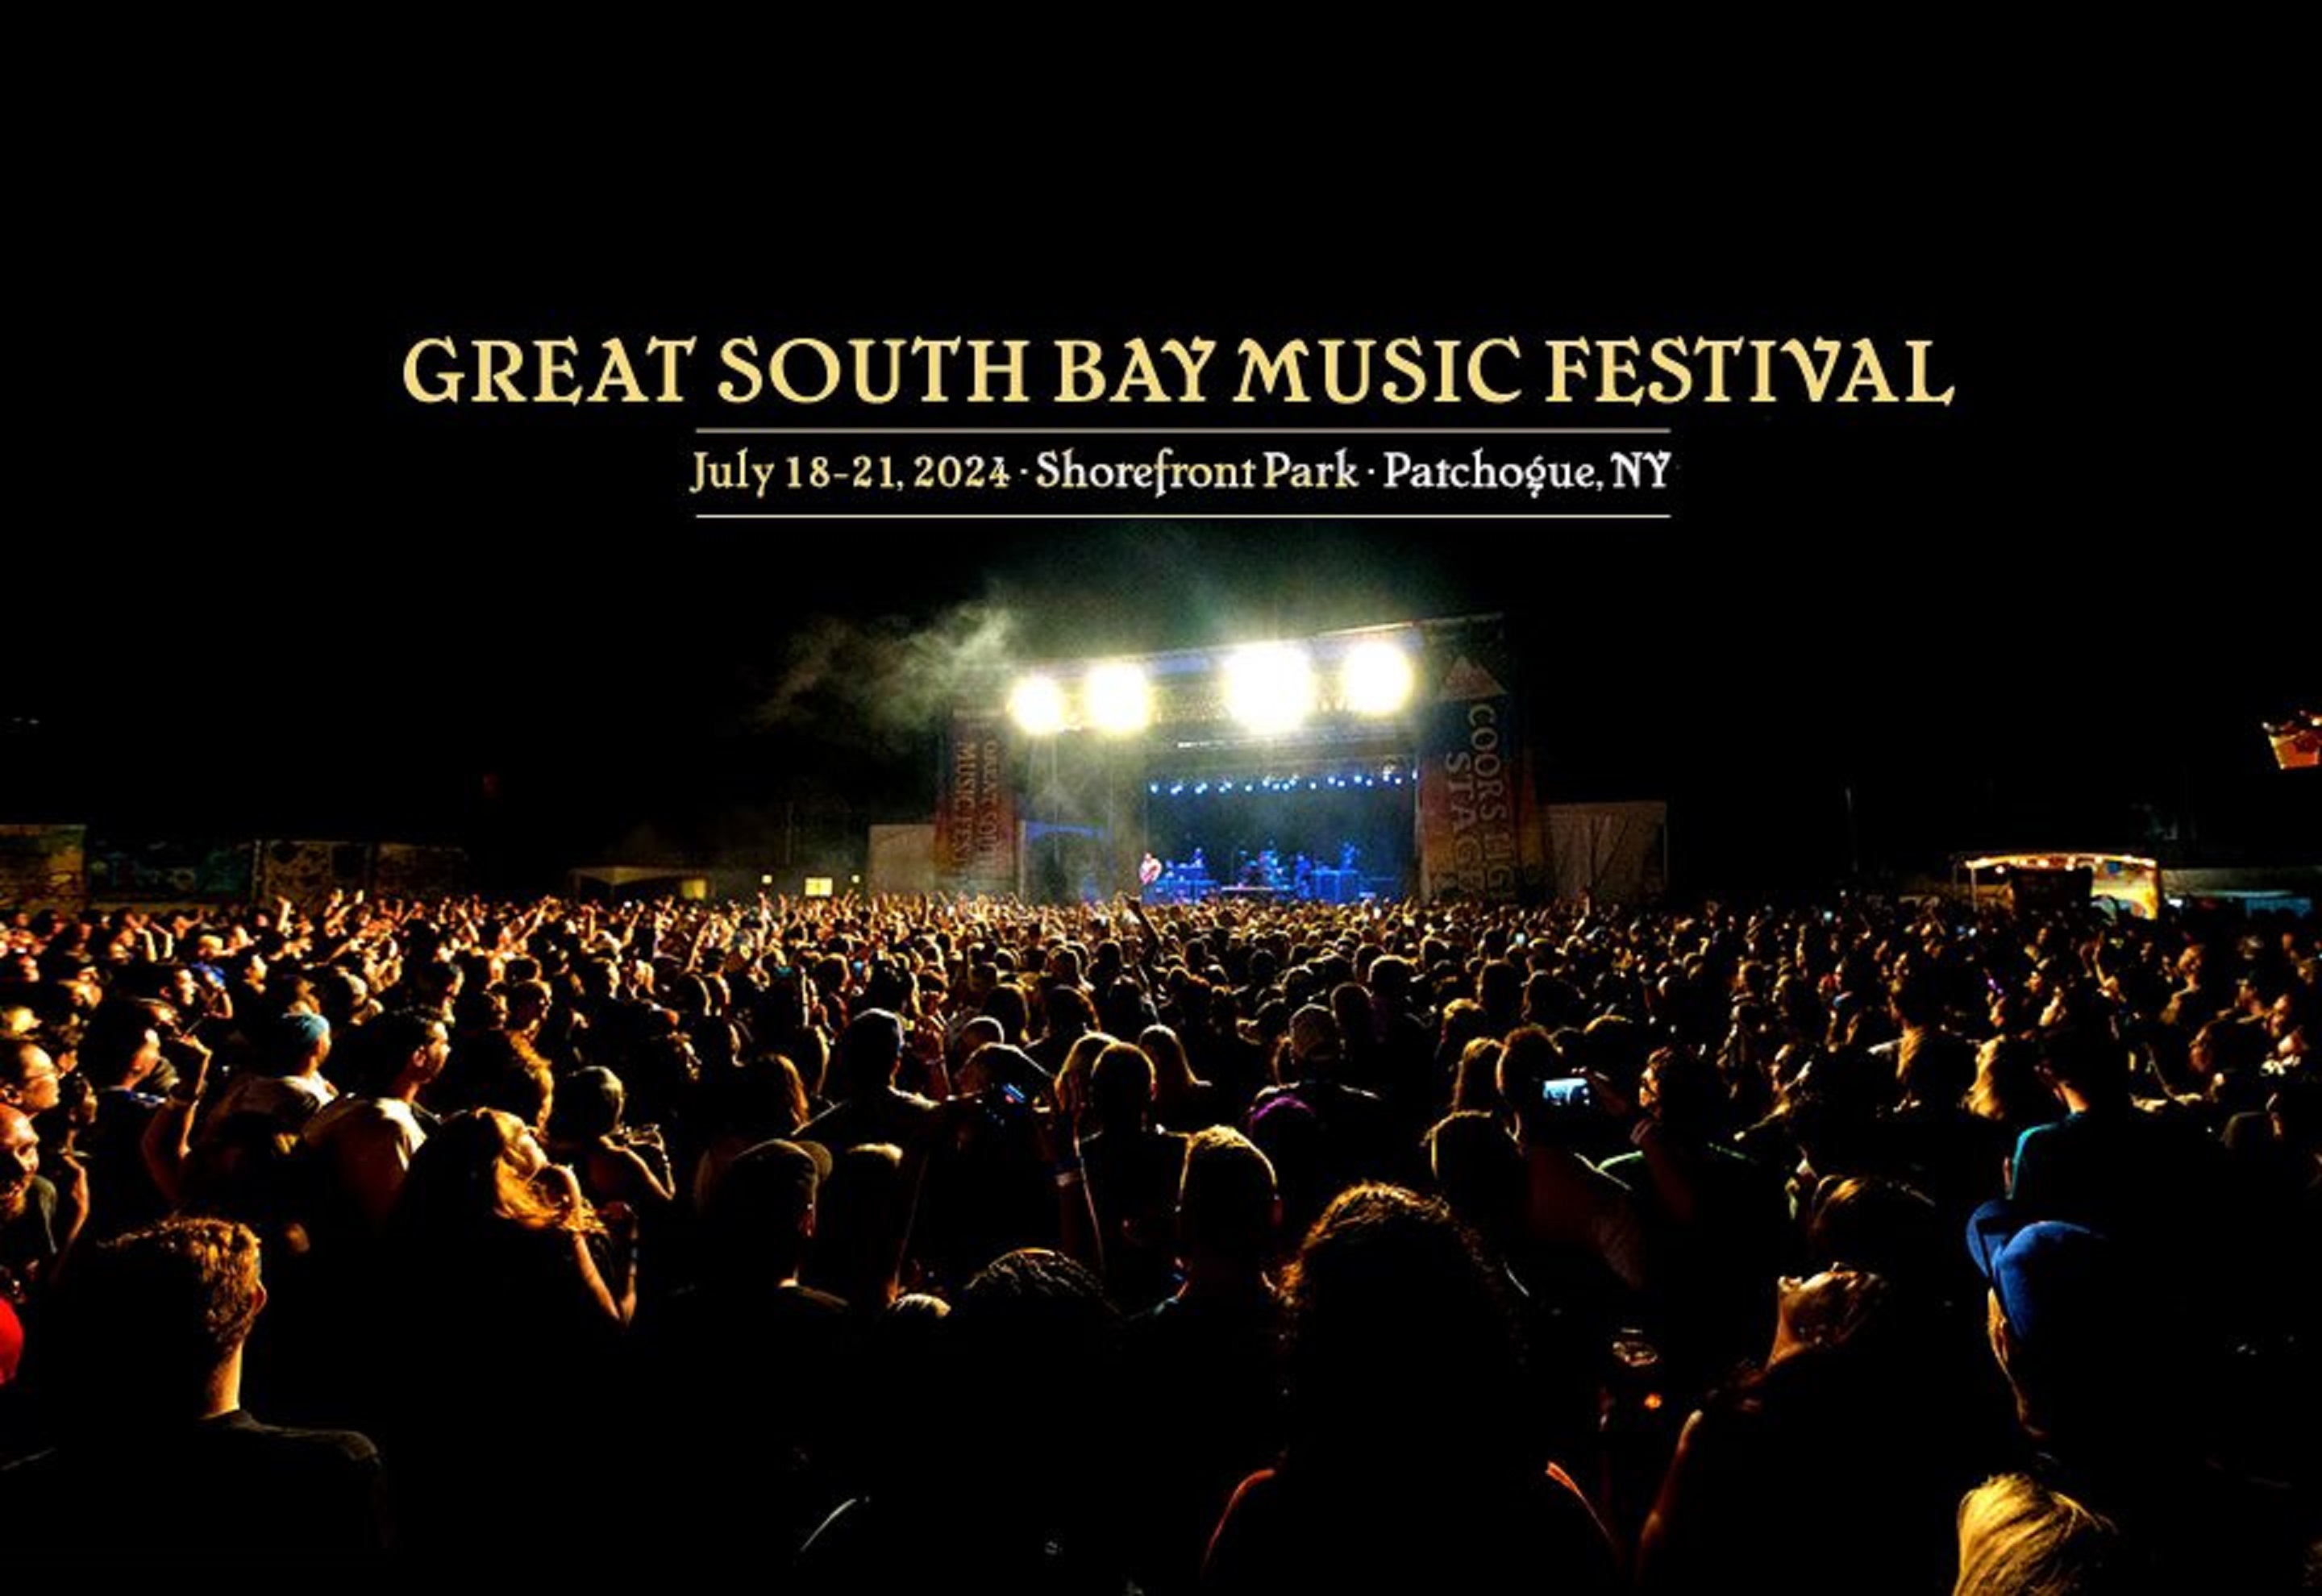 THE GREAT SOUTH BAY MUSIC FESTIVAL ANNOUNCES A VETS-ROCK “THANK YOU”